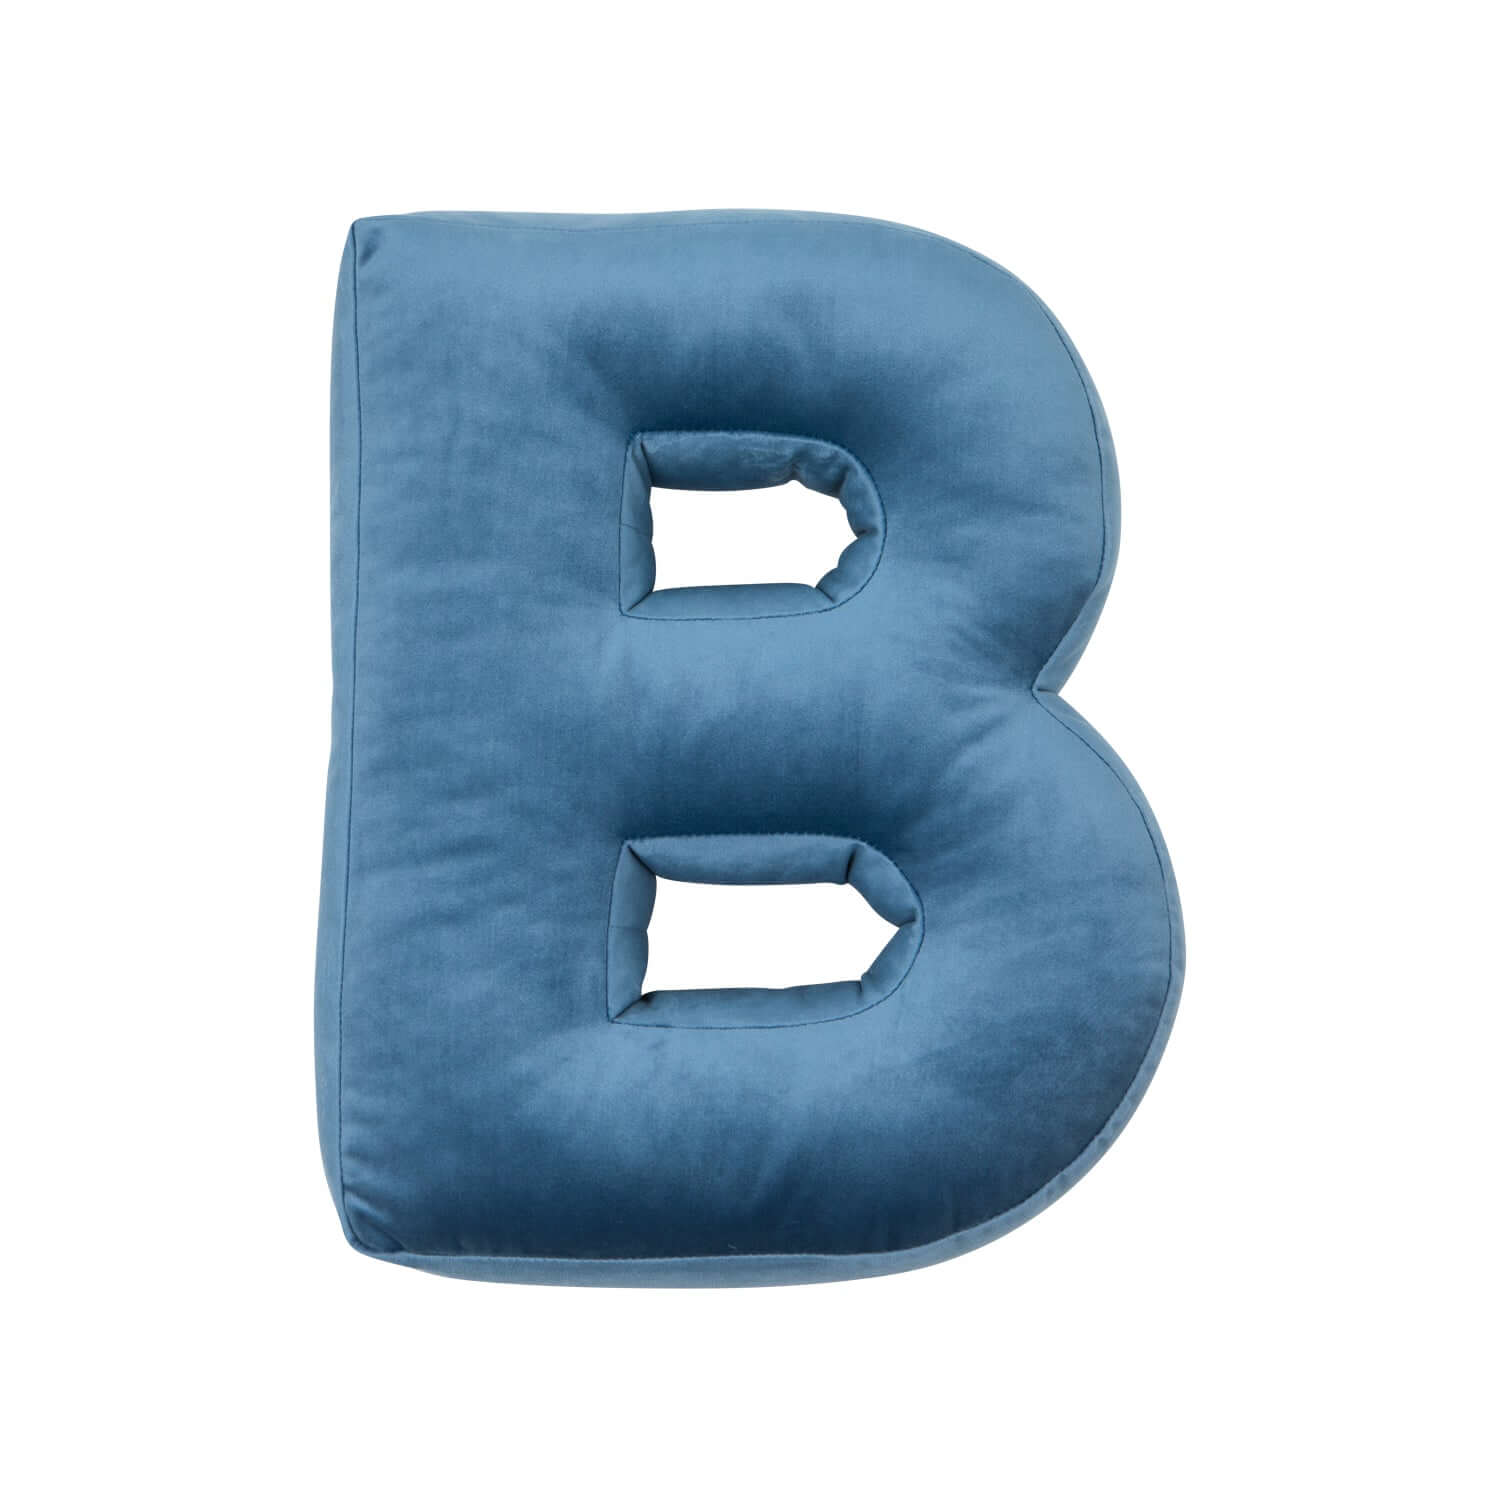 Velvet Letter Cushion B blue. Decorative pillow for couch. Baptism present from godparents. Holiday present ideas for her 